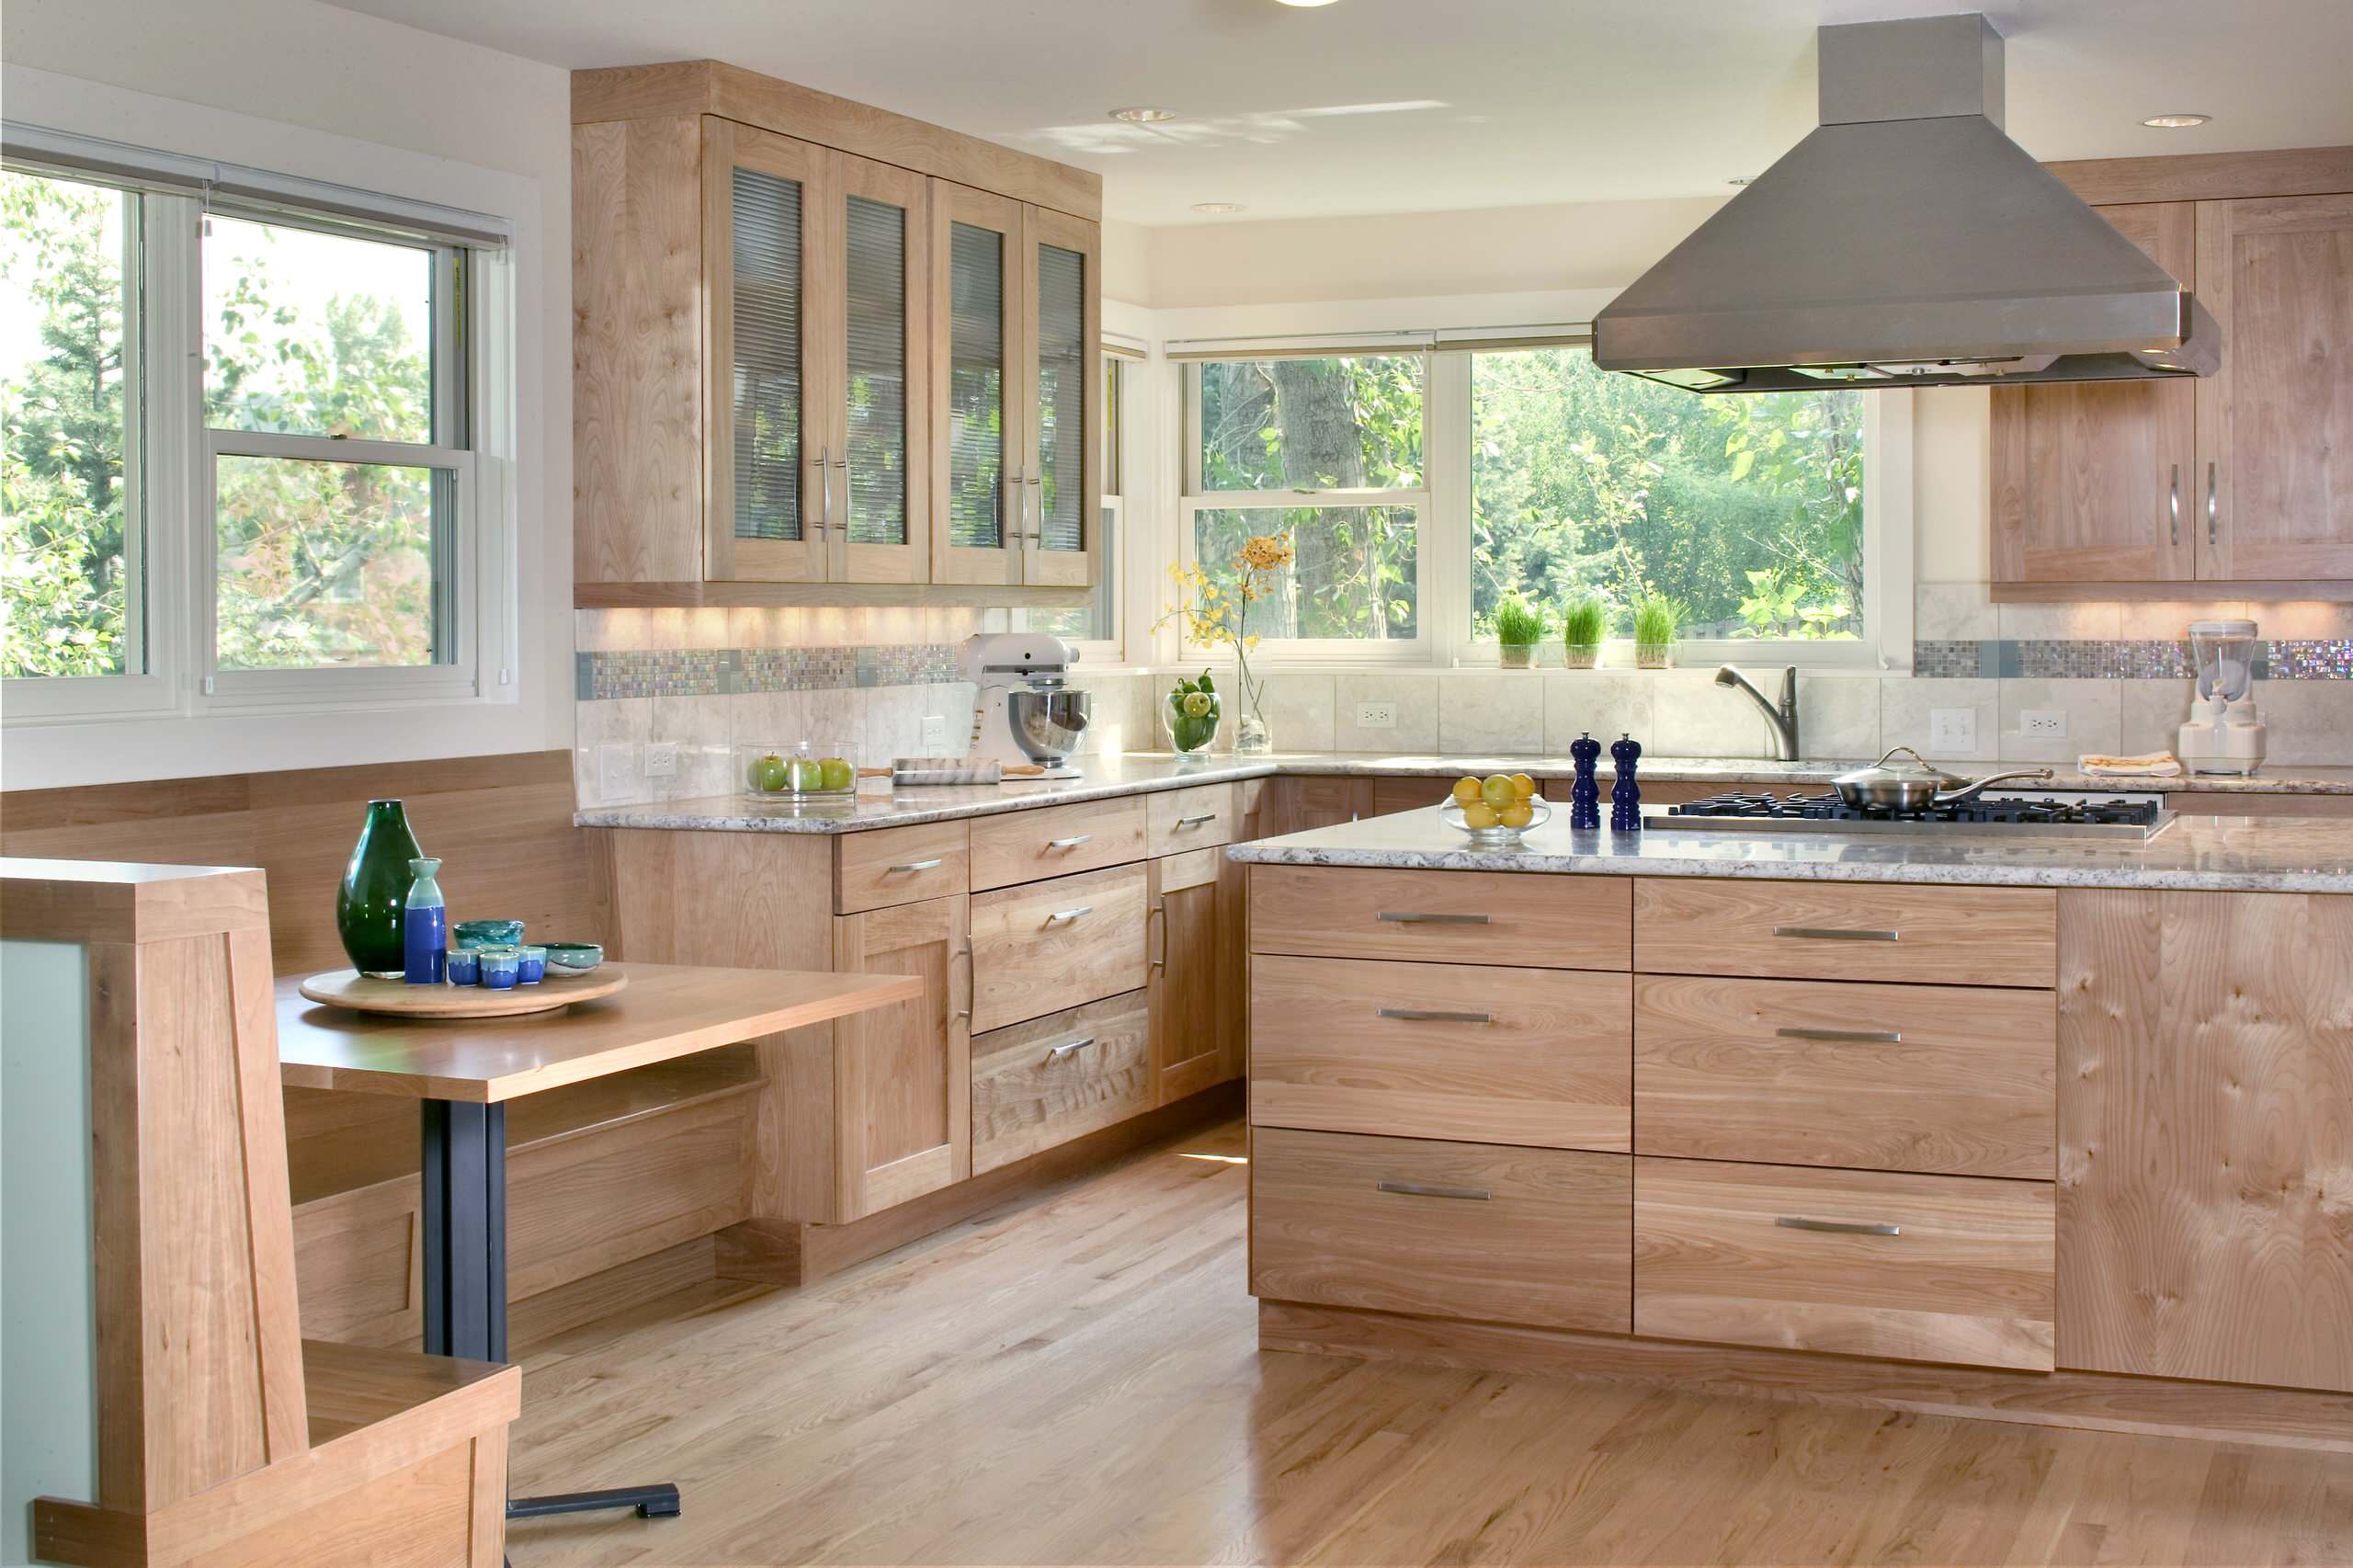 Natural Wood Cabinets - Photos & Ideas | Houzz